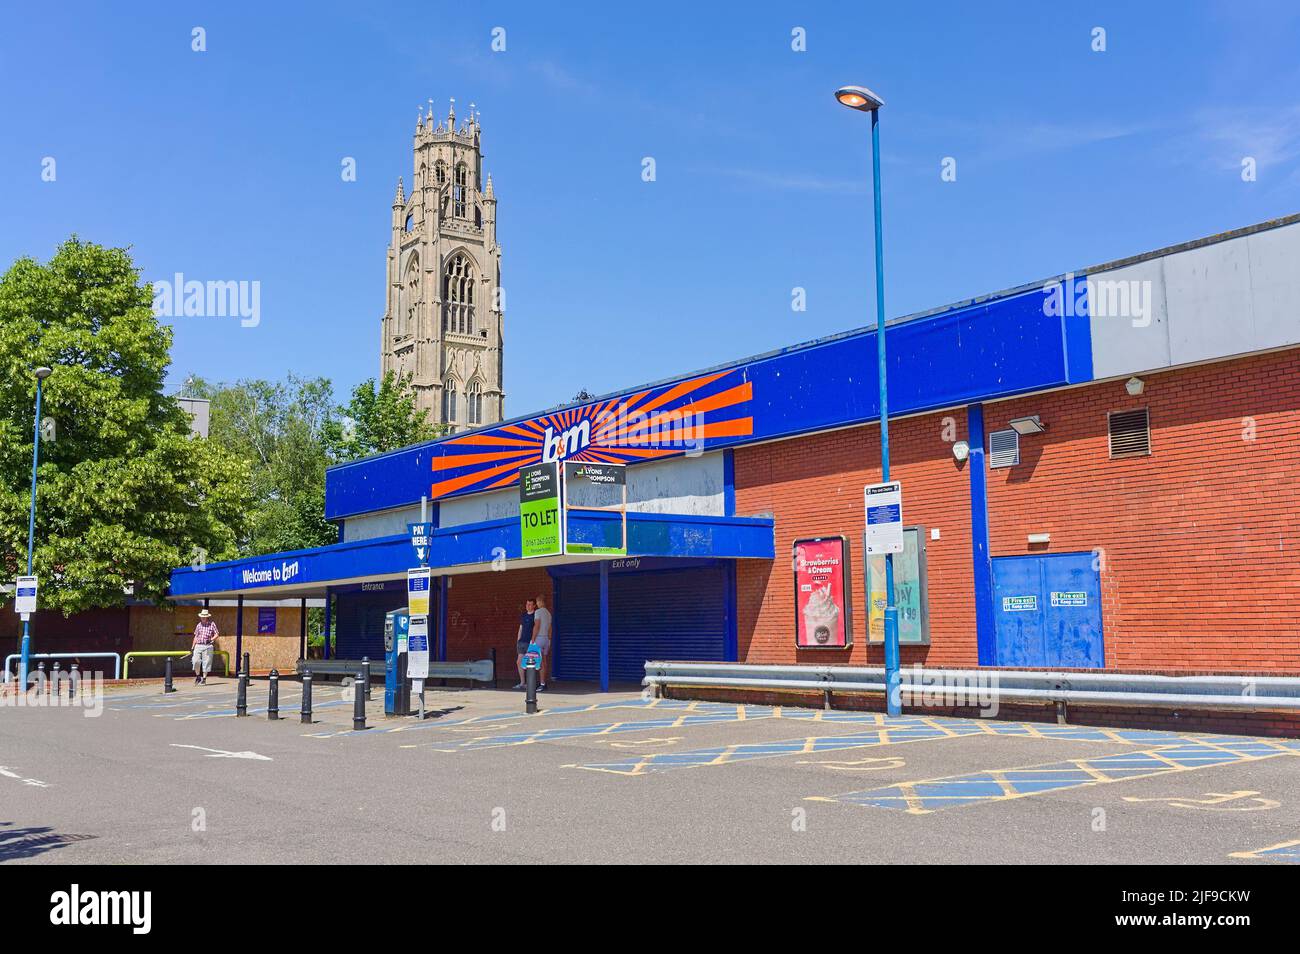 The closed down B & M store with the stump tower in the background on a sunny day Stock Photo